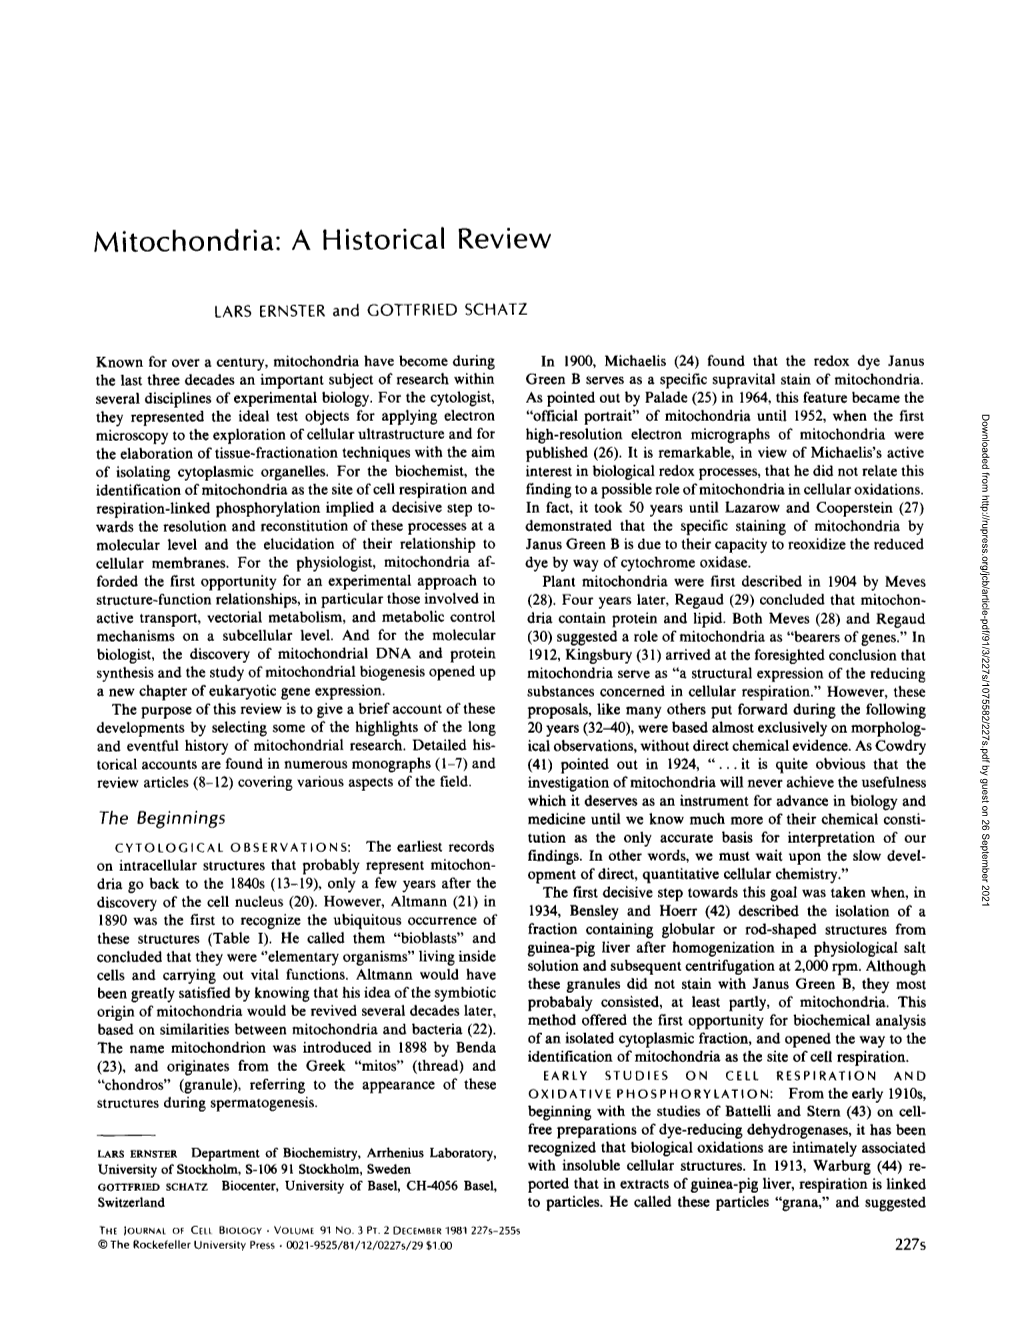 Mitochondria: a Historical Review